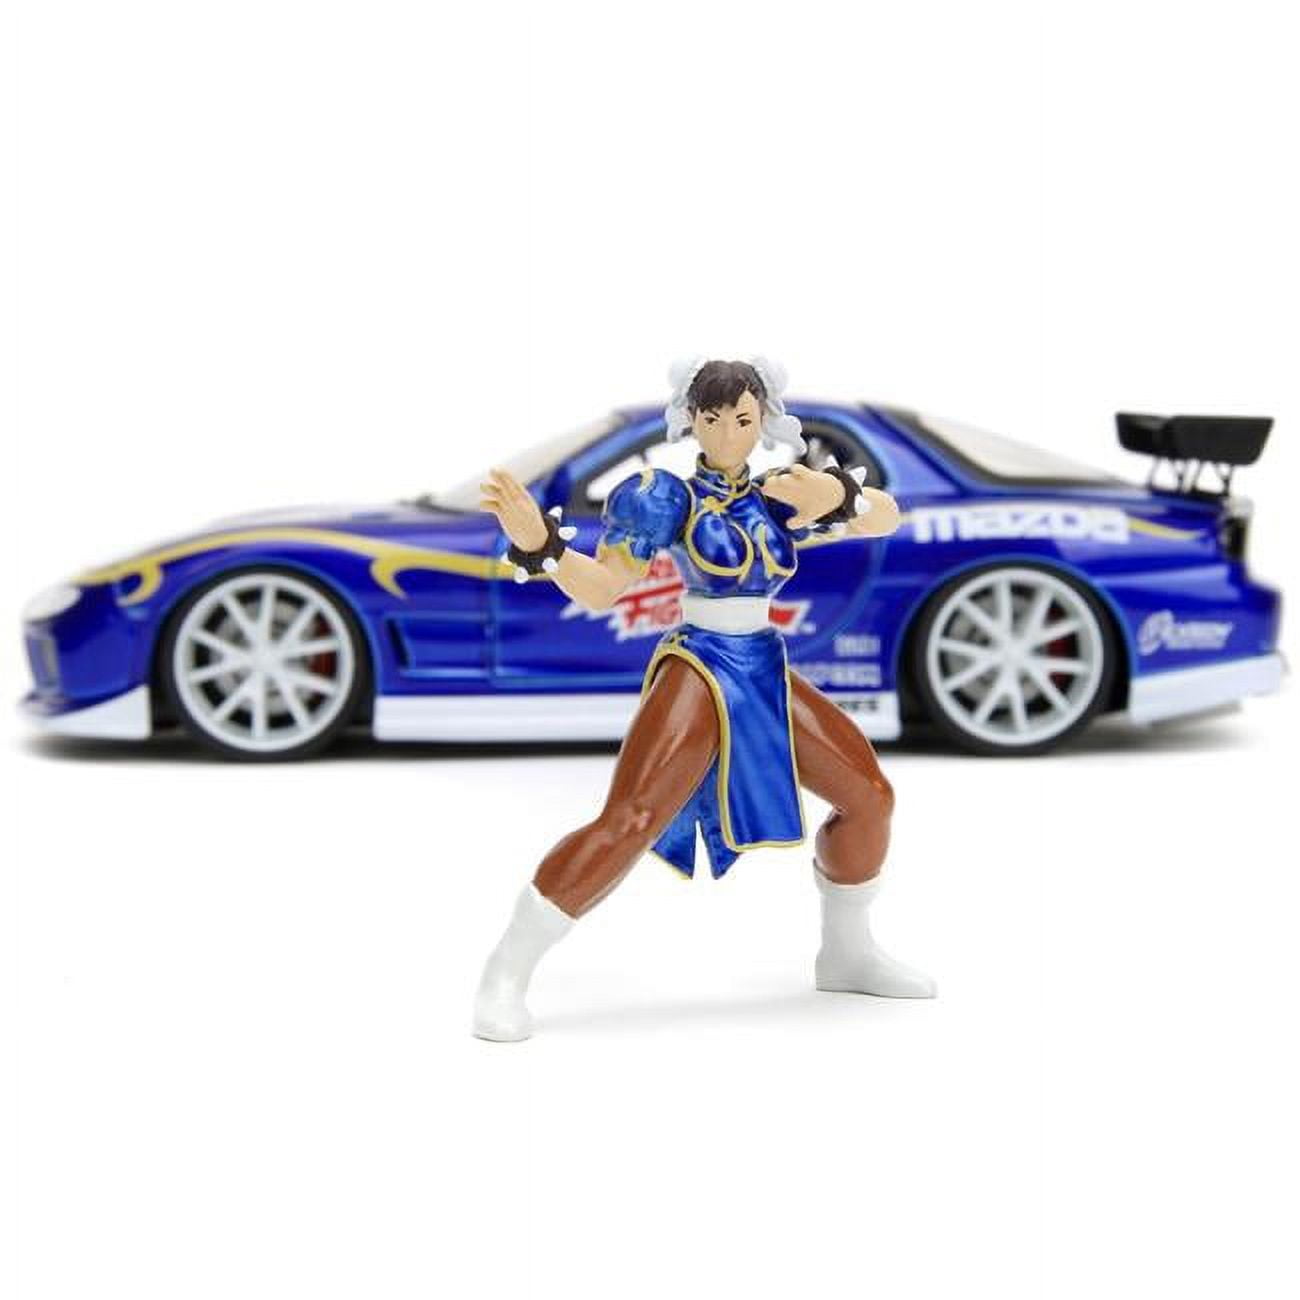 Jada Toys Jada 30838 1993 Mazda RX-7 Candy with Graphics & Chun-Li Diecast Figure Street Fighter Video Game Anime Hollywood Rides Series 1